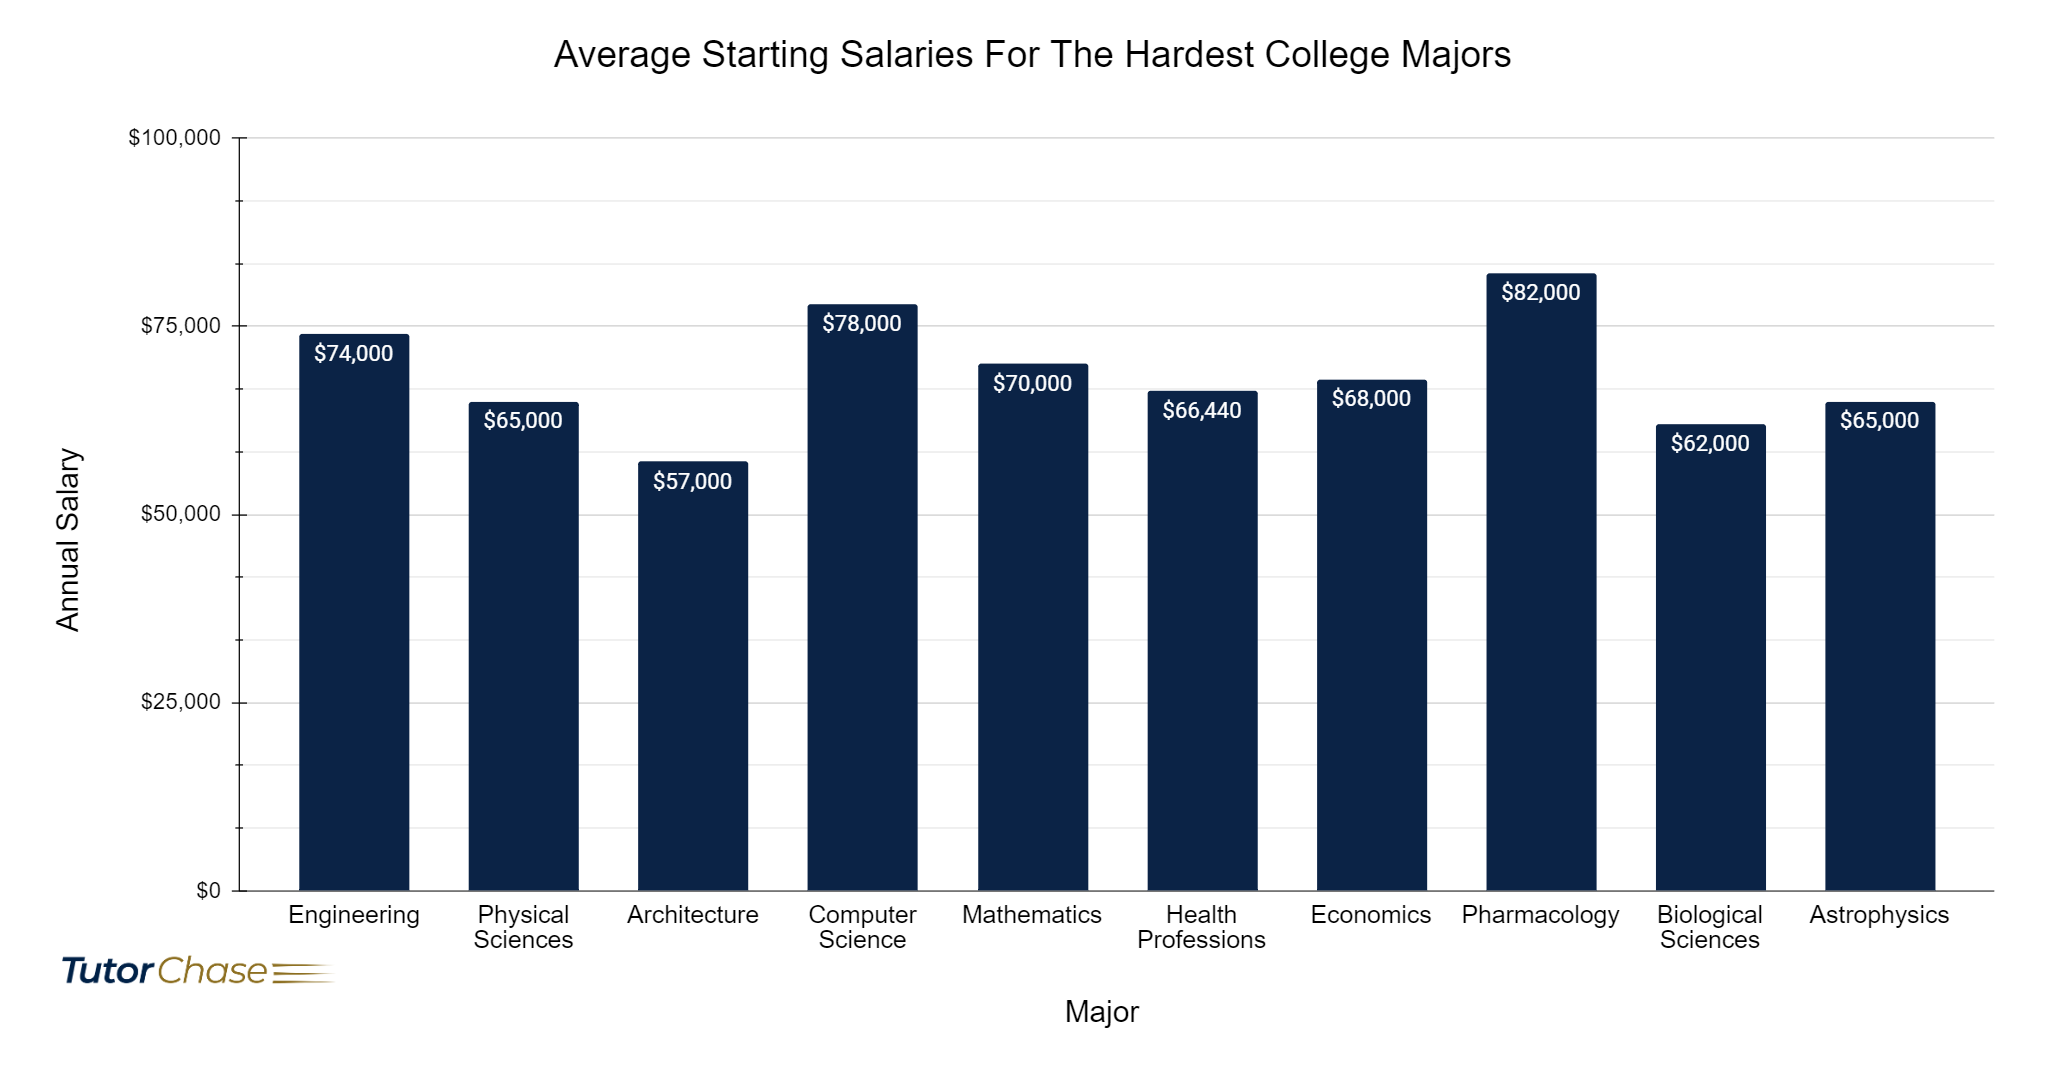 Average Starting Salaries For The Hardest College Majors